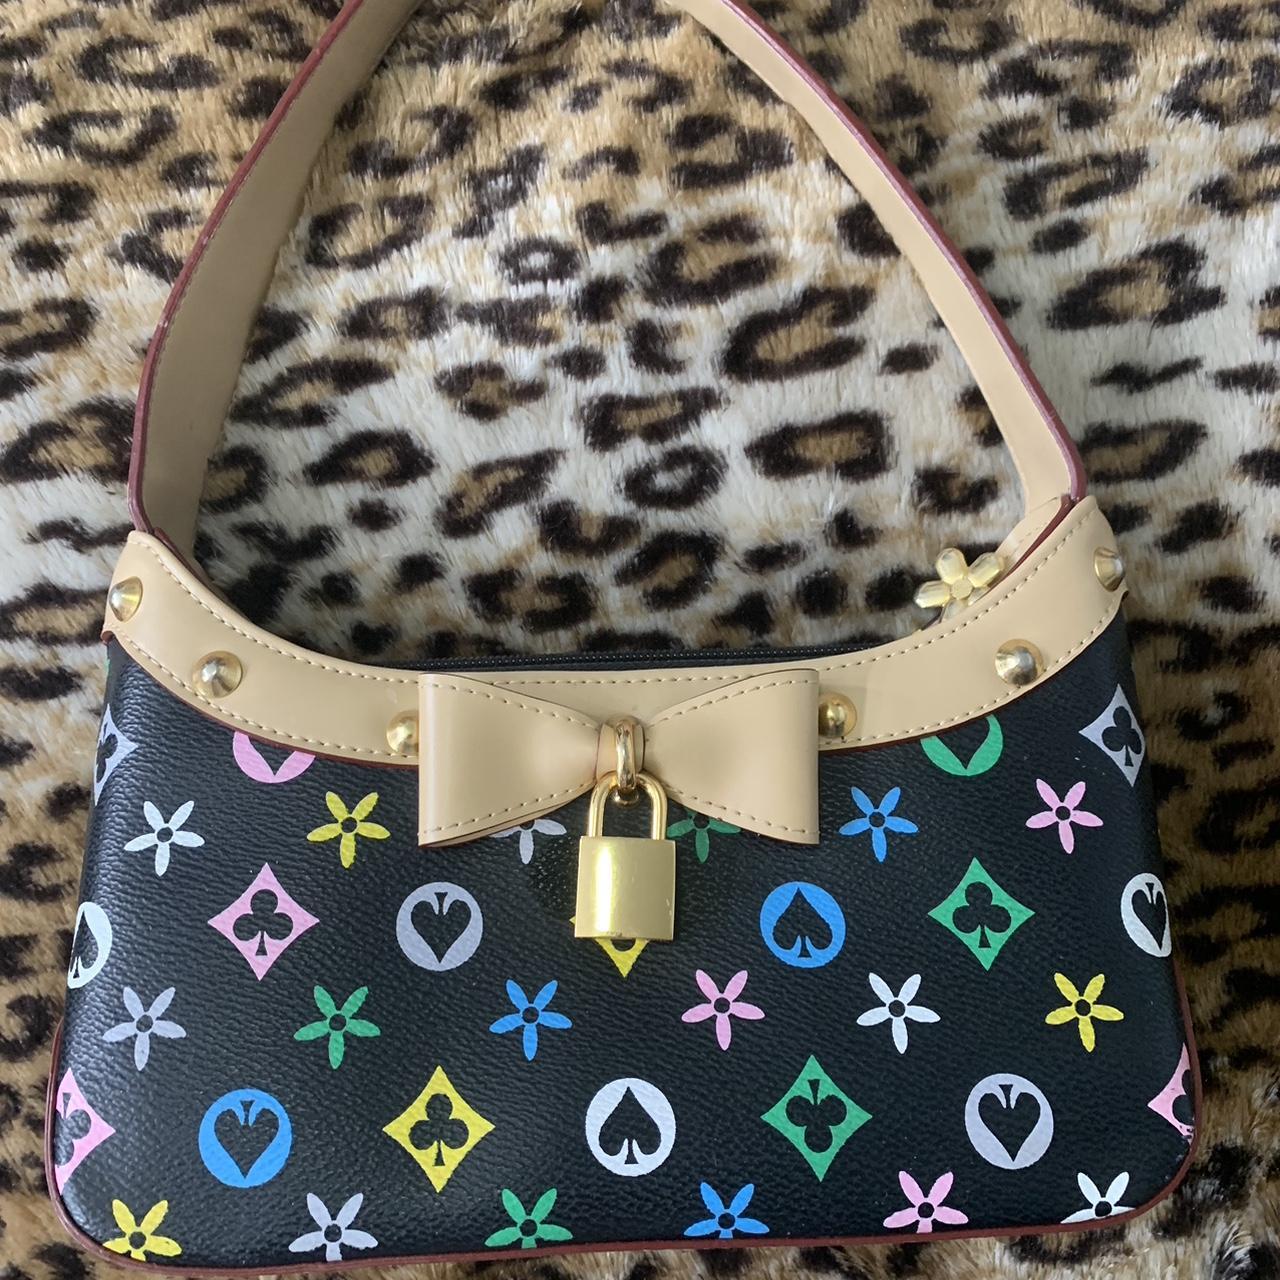 White synthetic leather with multi-color LV monogram print